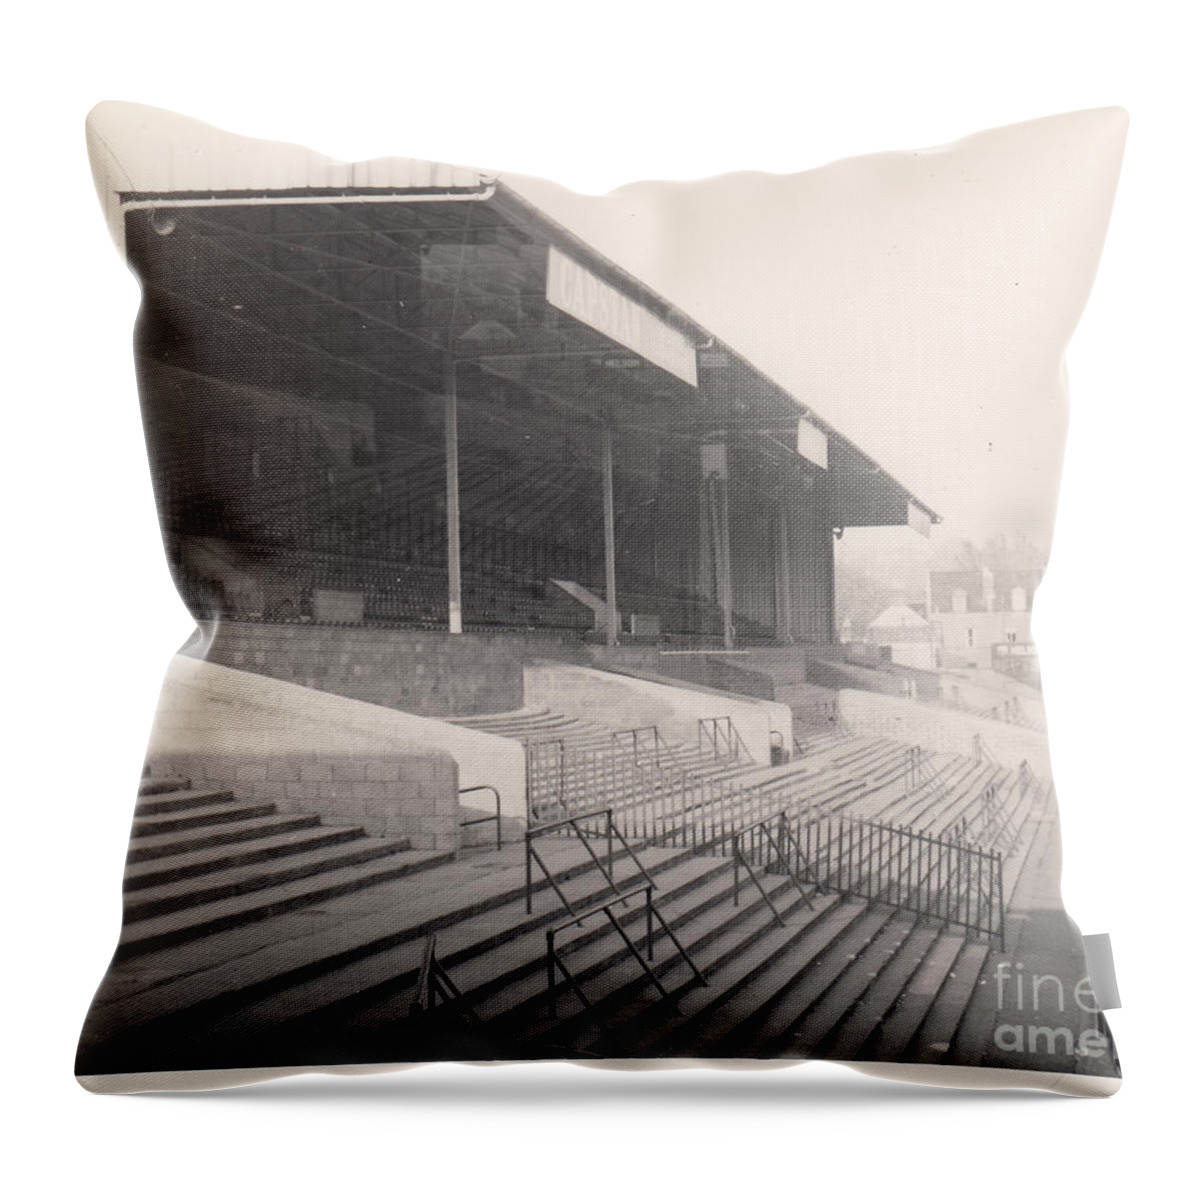  Throw Pillow featuring the photograph Bristol City - Ashton Gate - Williams Stand 1 - October 1964 by Legendary Football Grounds